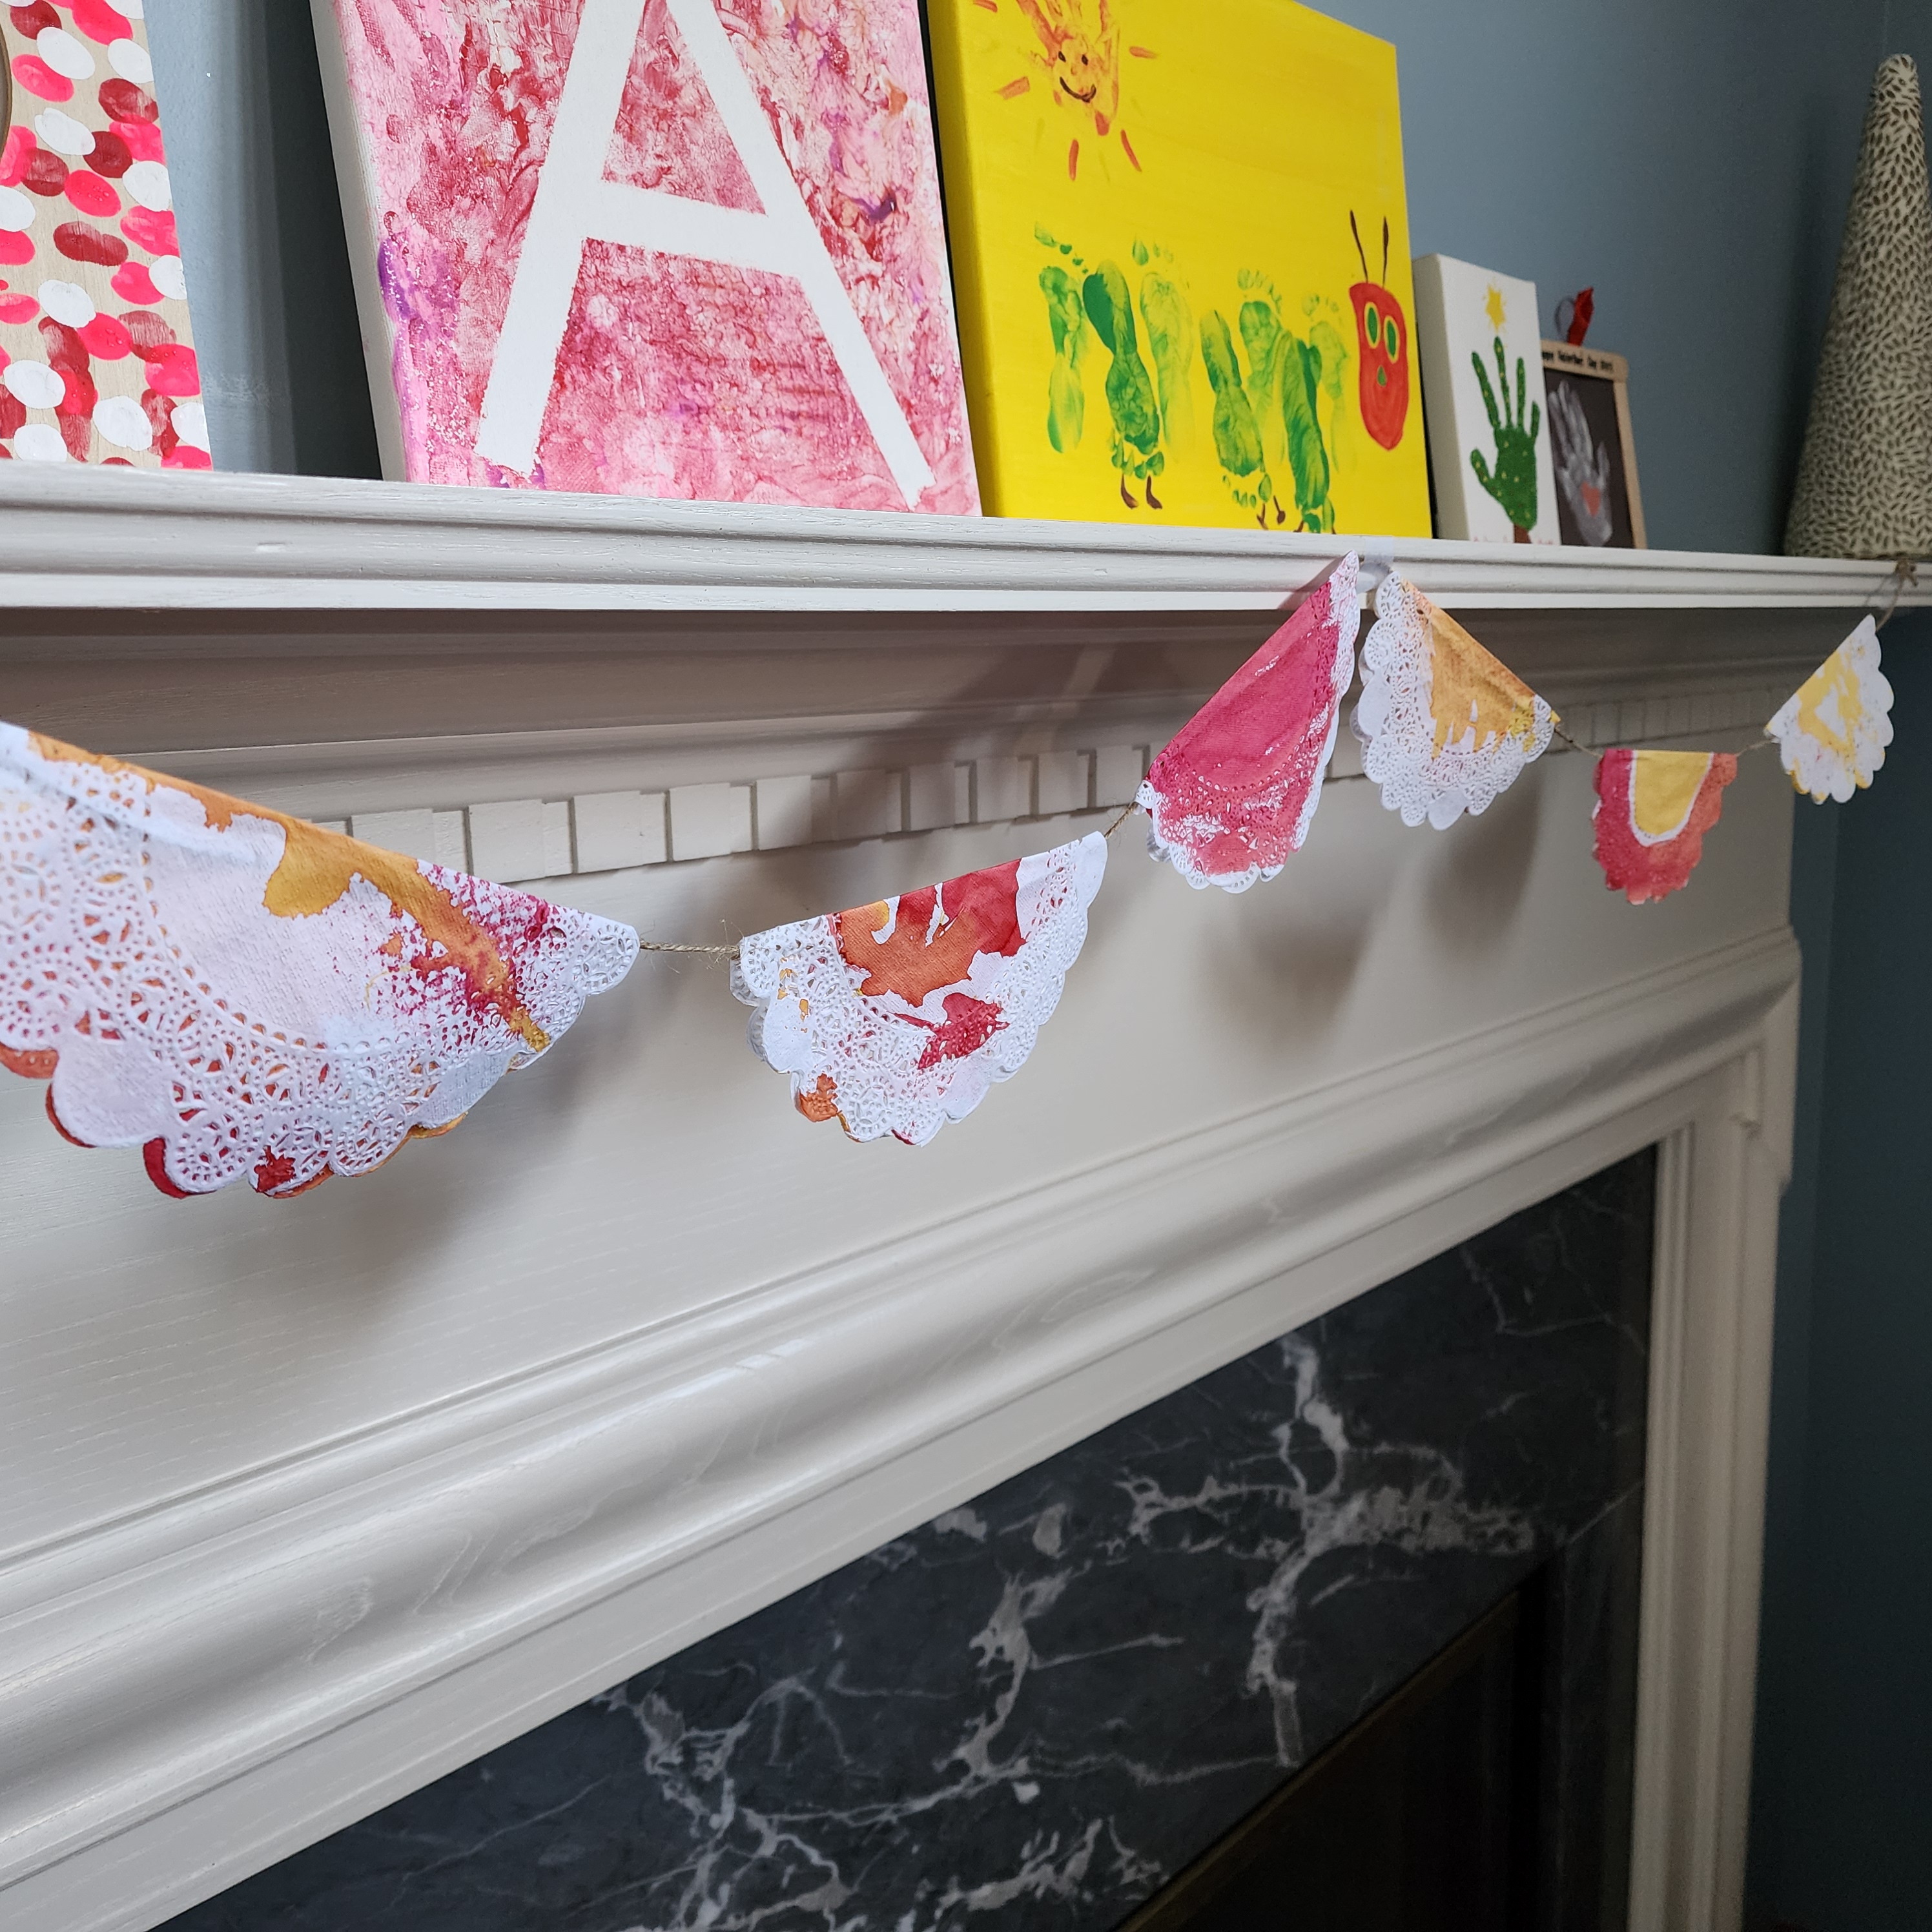 Watercolor stained row of doilies strung up by string